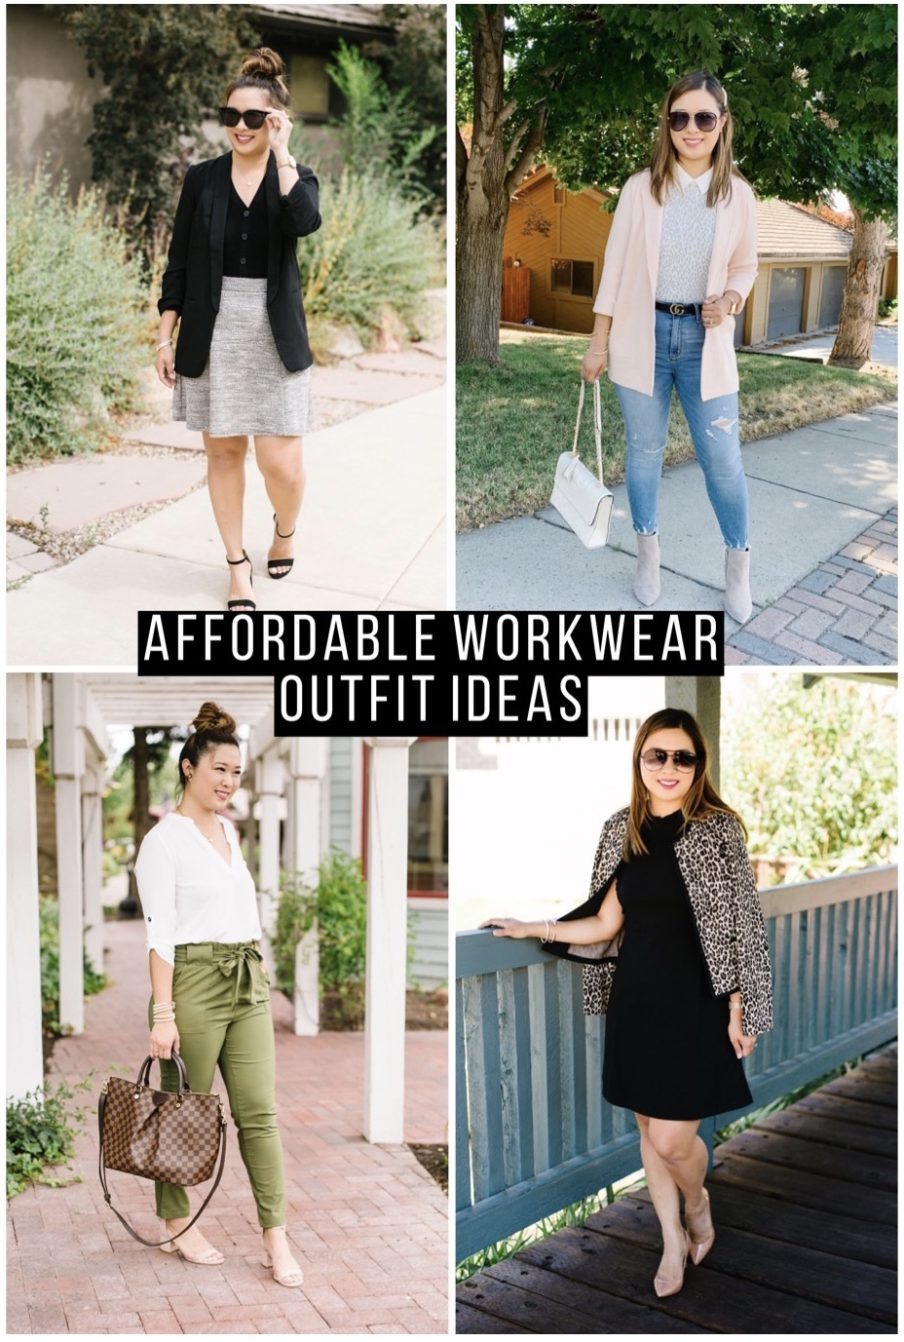 3 Work Outfit Ideas To Wear This Fall